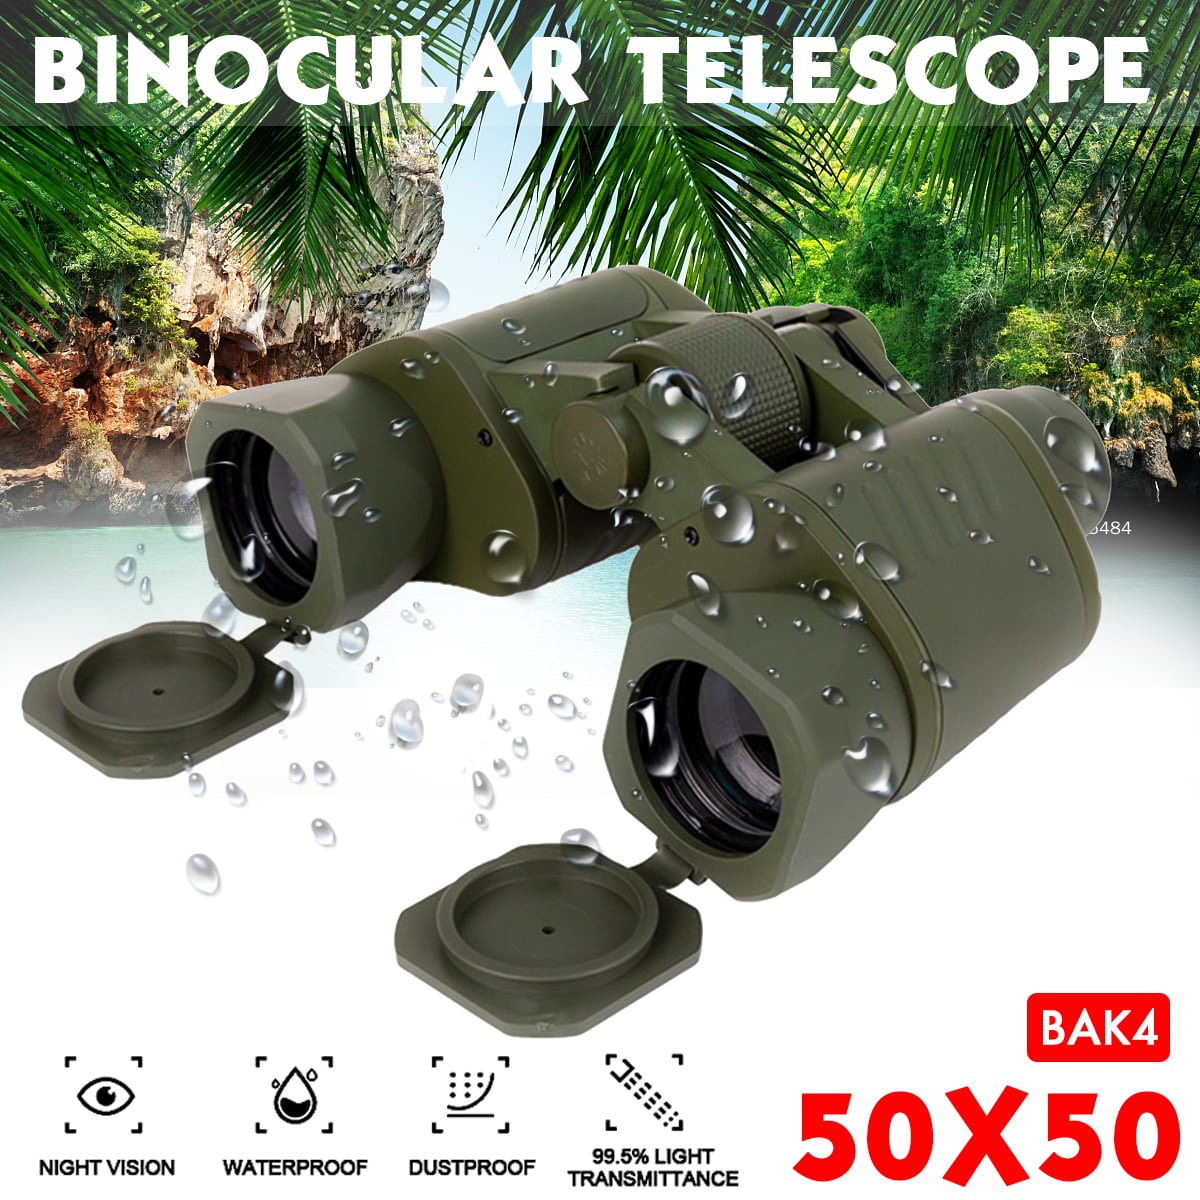 Catadioptric Telescope 20X50 Low Light Level Night Vision Outdoor Travel Concert Big Eyepiece High Magnification Telescope for Astronomy Beginners Telescope LFIM 